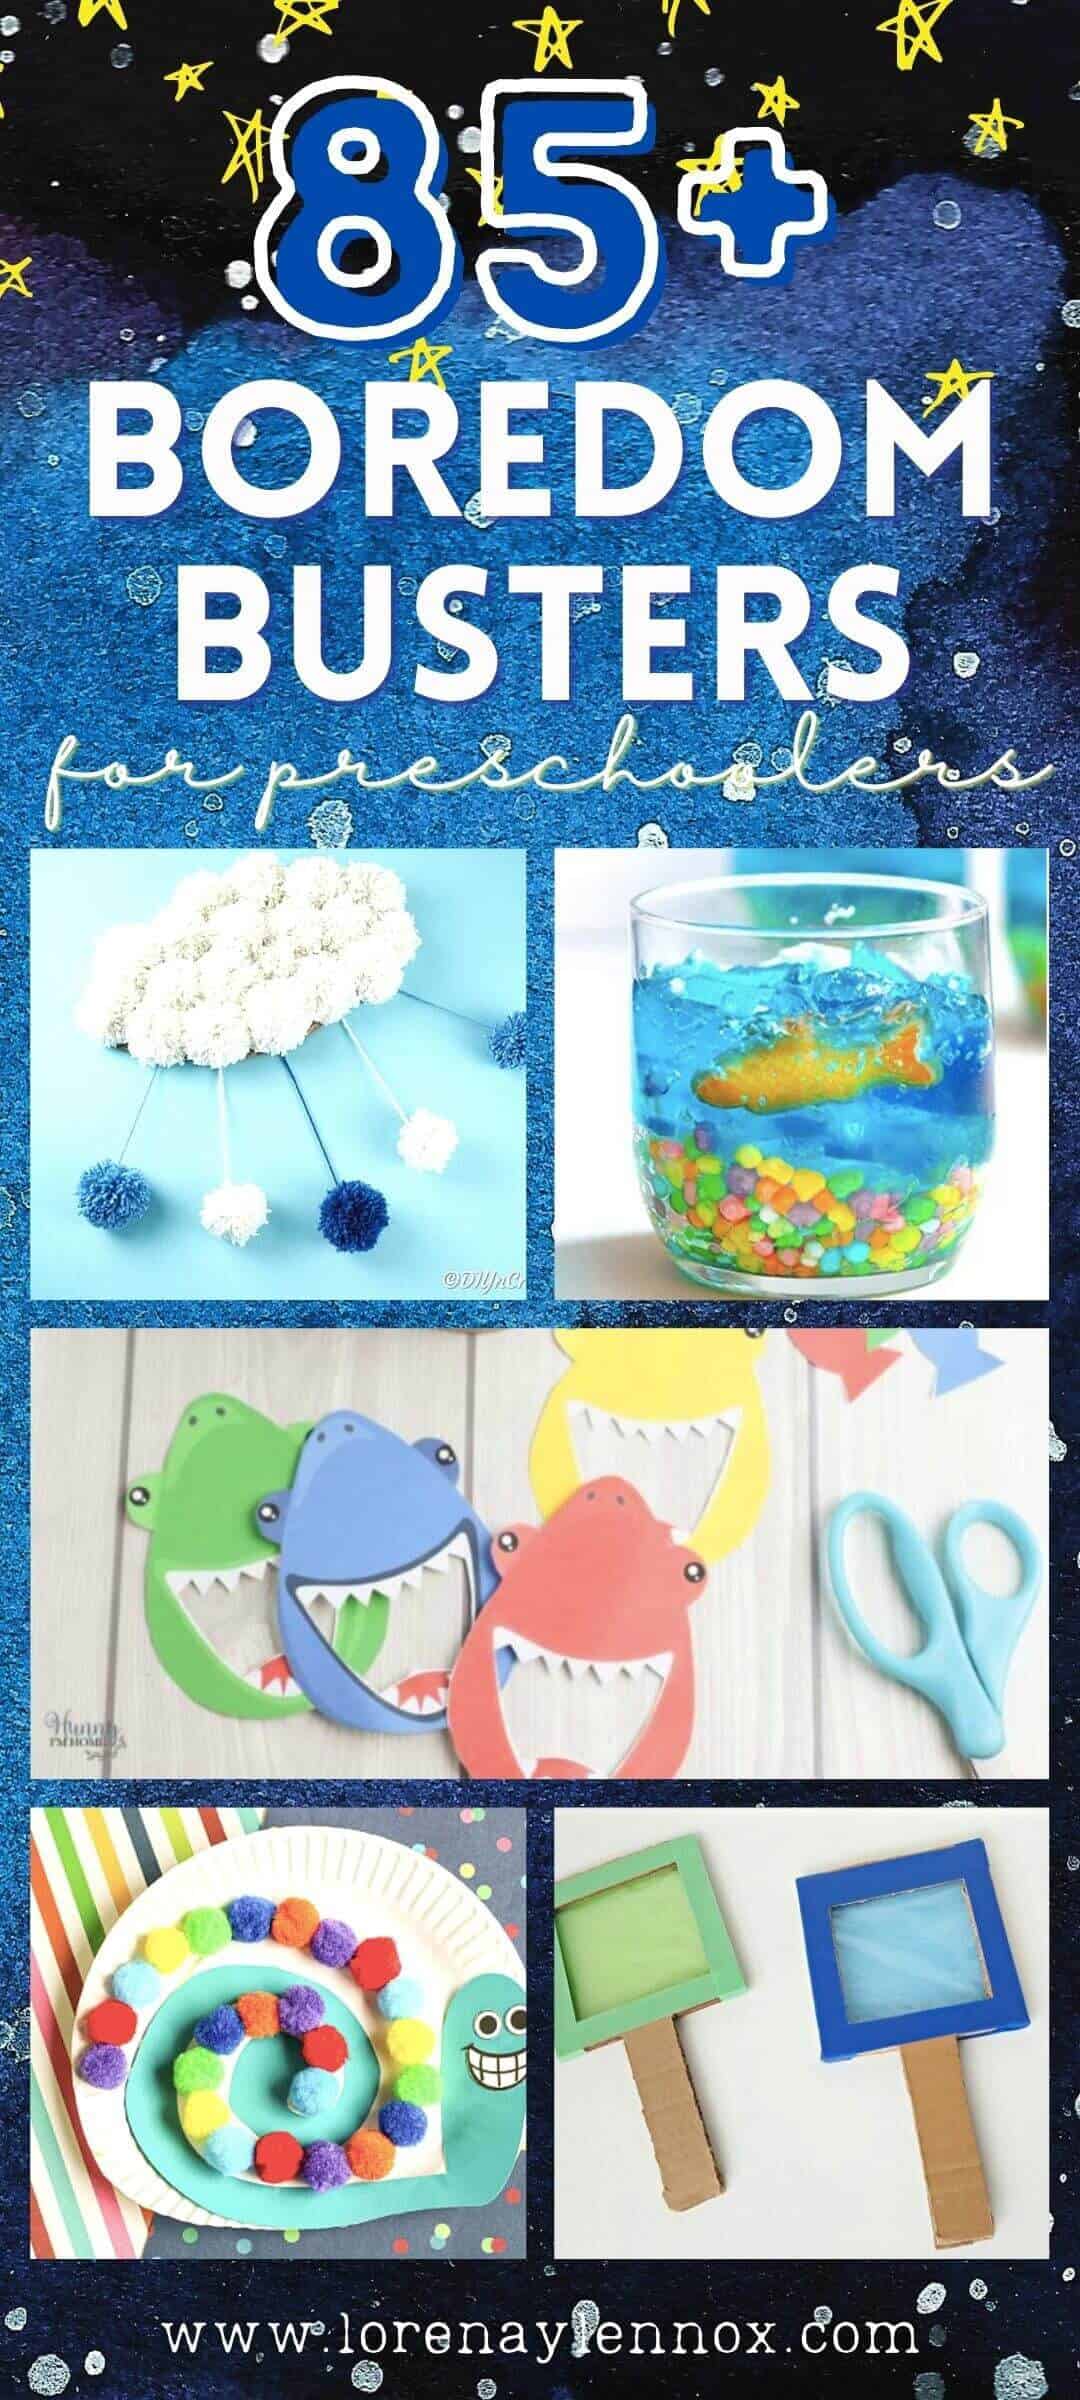 85 + Boredom Busters for Toddlers and Preschoolers That You Can Do Right From Home #activitiesfortoddlers #activitiesforpreschoolers #finemotoractivities #grossmotoractivities #sensoryactivities #athomeactivitiesfortoddlers #learningactivitiesforpreschoolers #toddlersensoryactivities